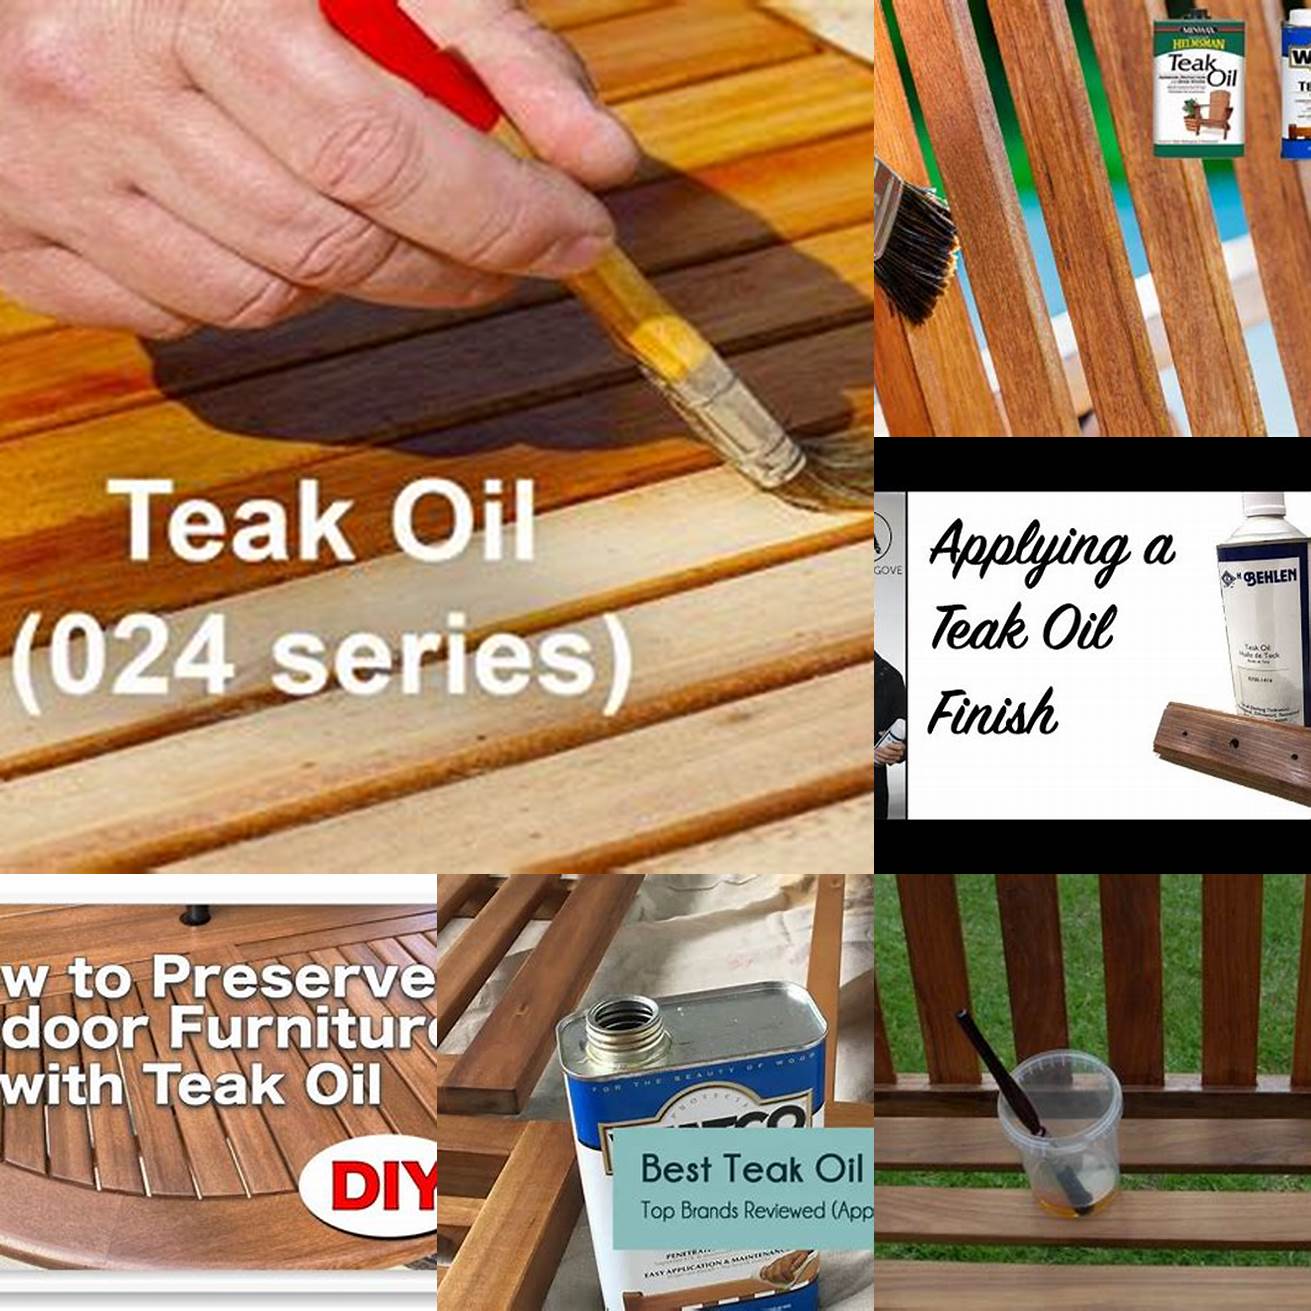 Picture of a person applying teak oil in the proper way